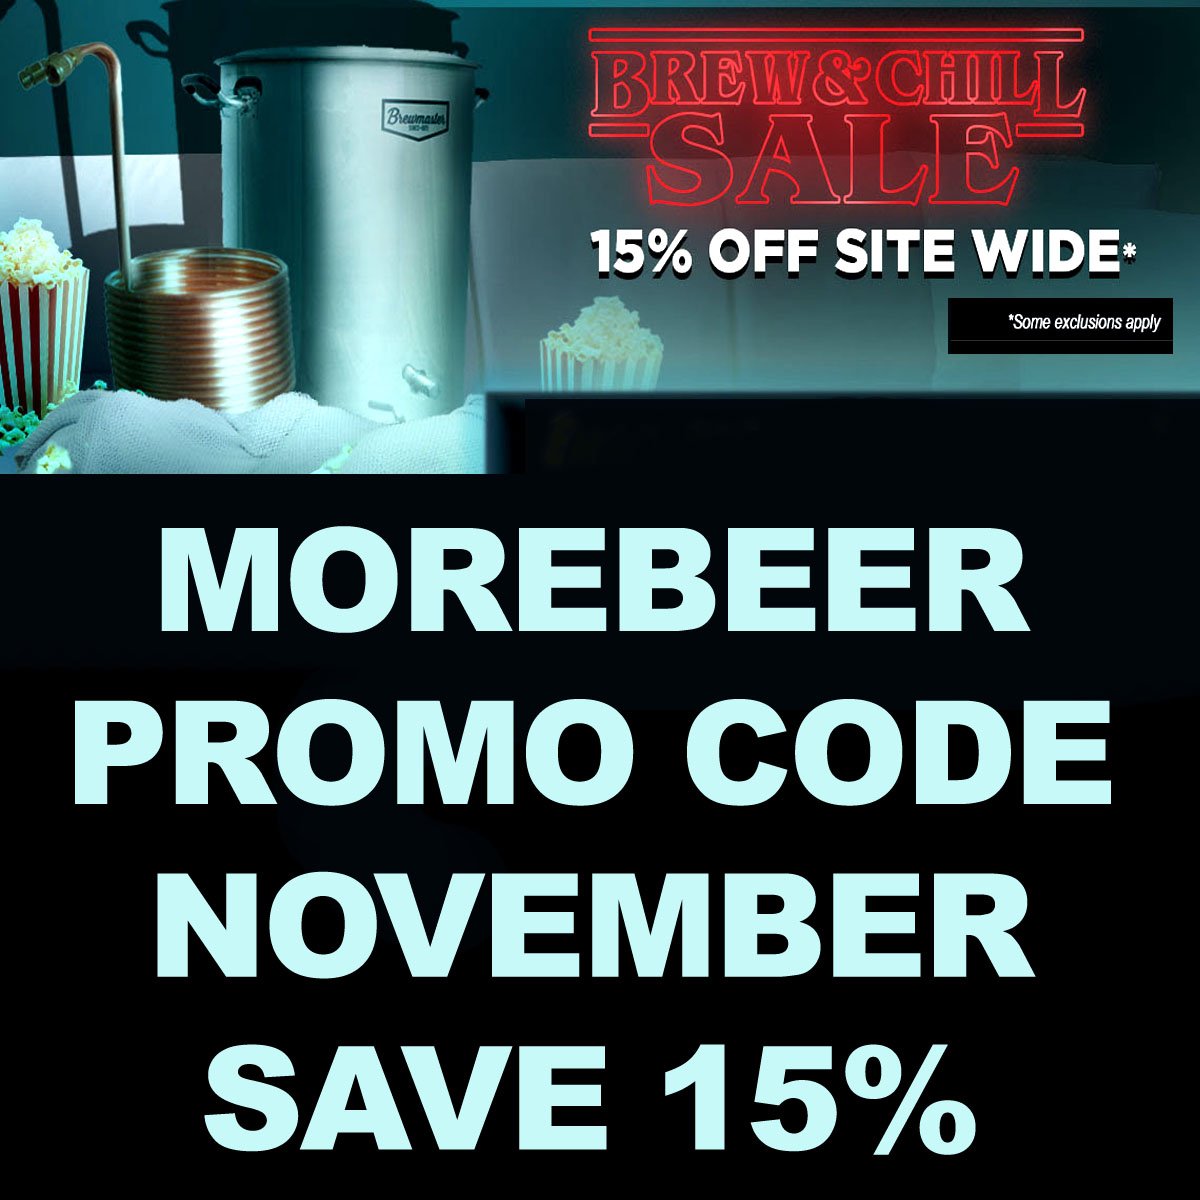 Save 15% Site Wide at More Beer with this MoreBeer.com Promo Code